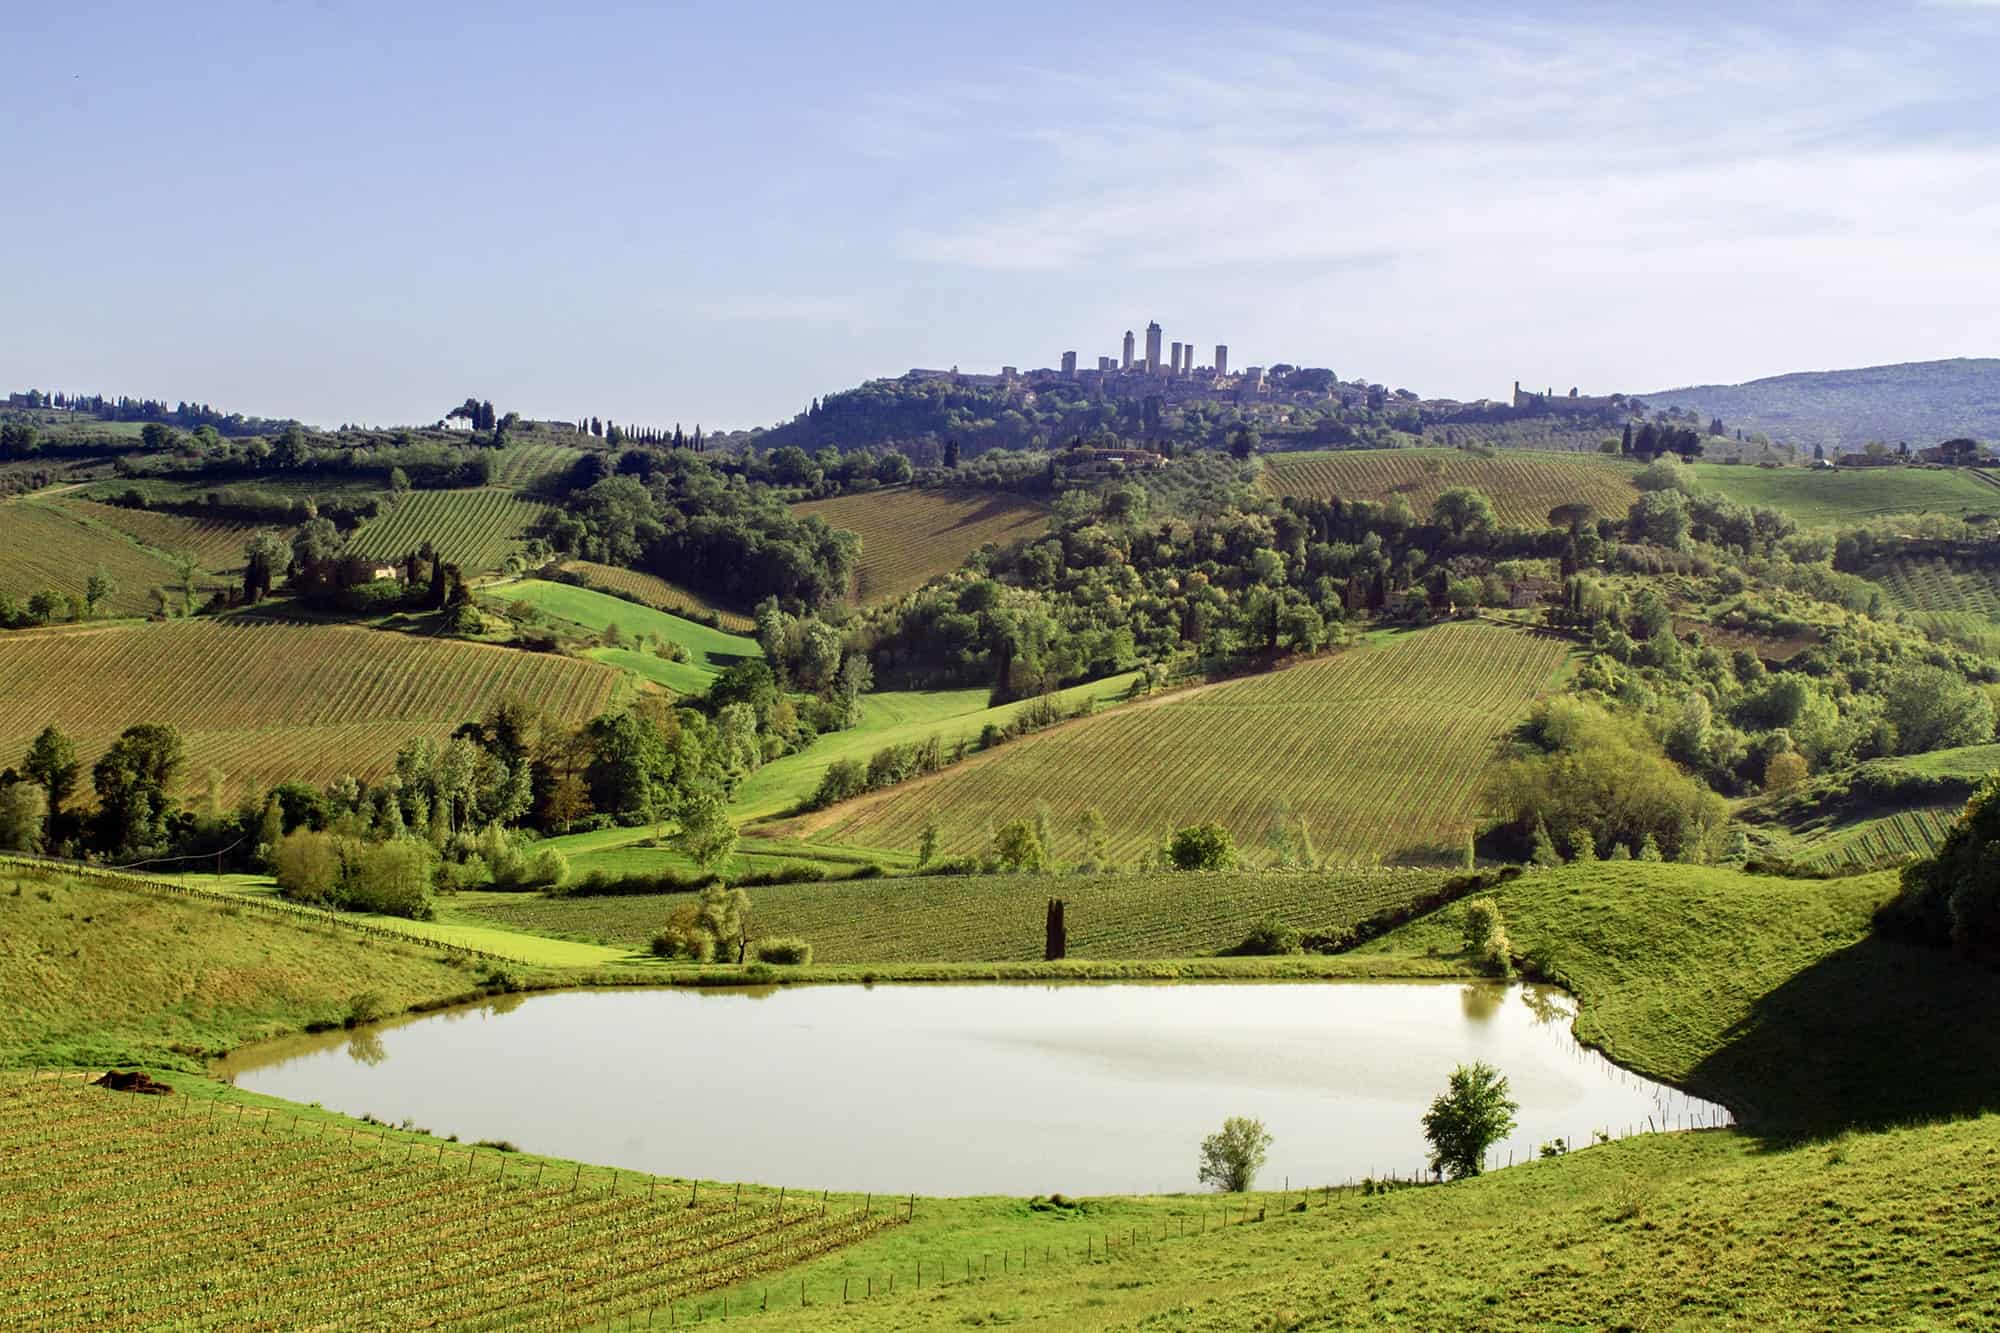 A view of the rolling hills and vineyards in Tuscany just outside Florence, Italy